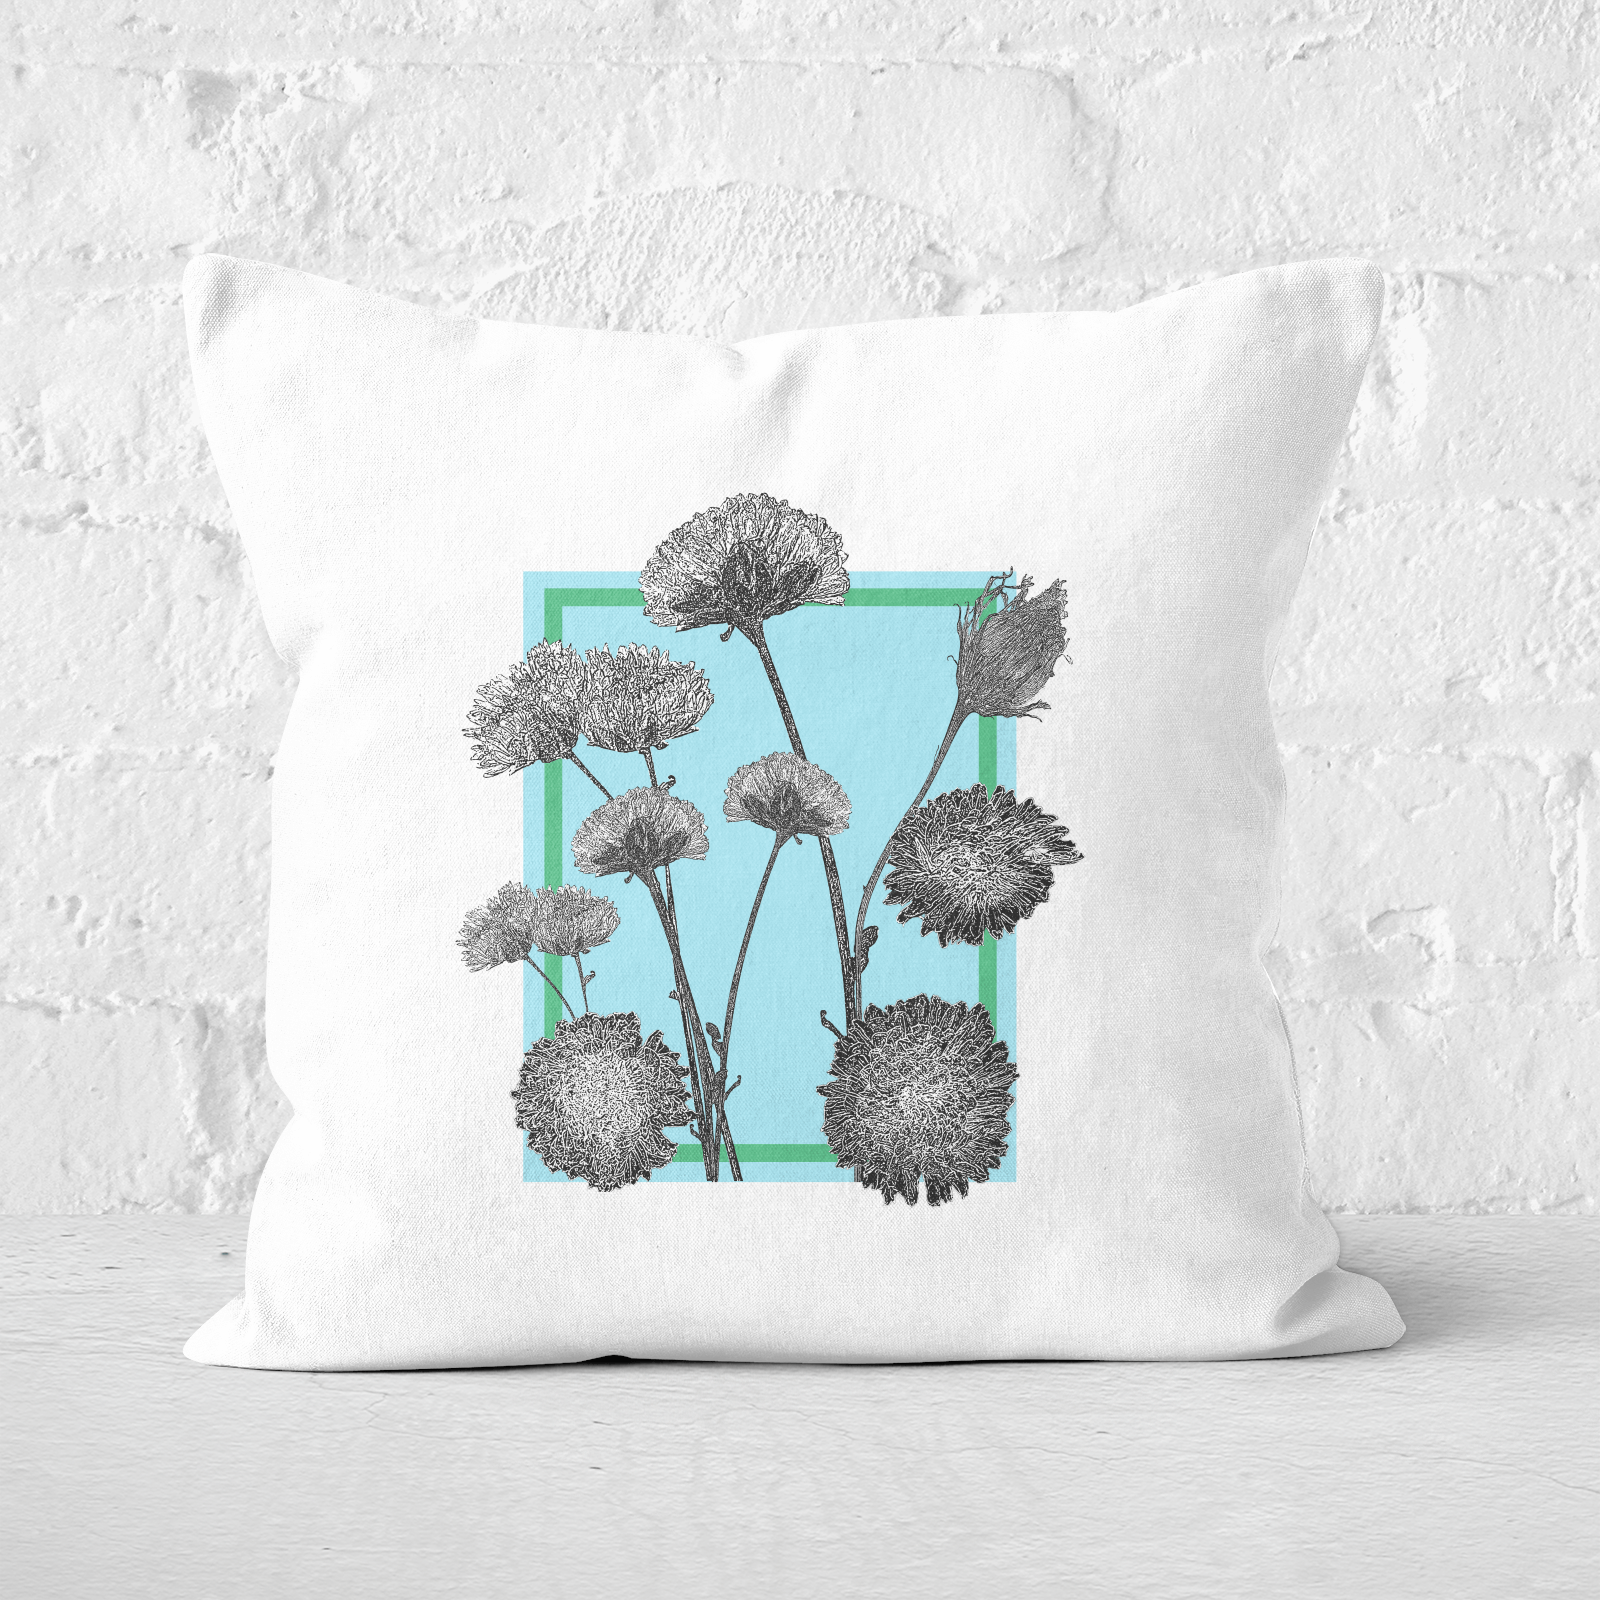 Pressed Flowers Cool Tones Framed Sketched Flowers Square Cushion - 60x60cm - Soft Touch